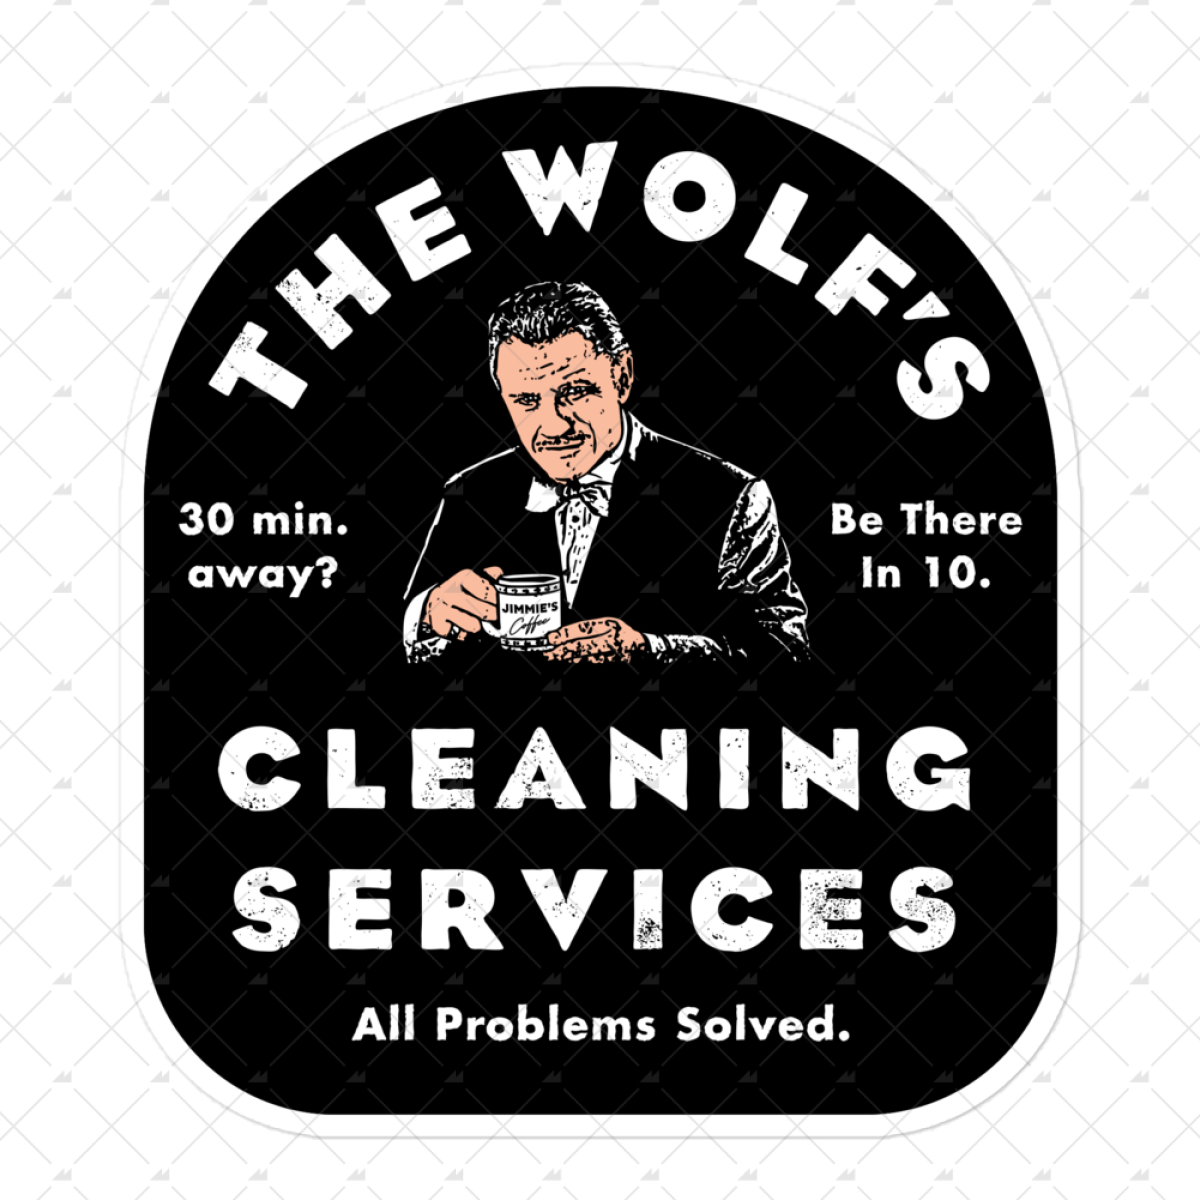 The Wolf's Cleaning Services - Sticker